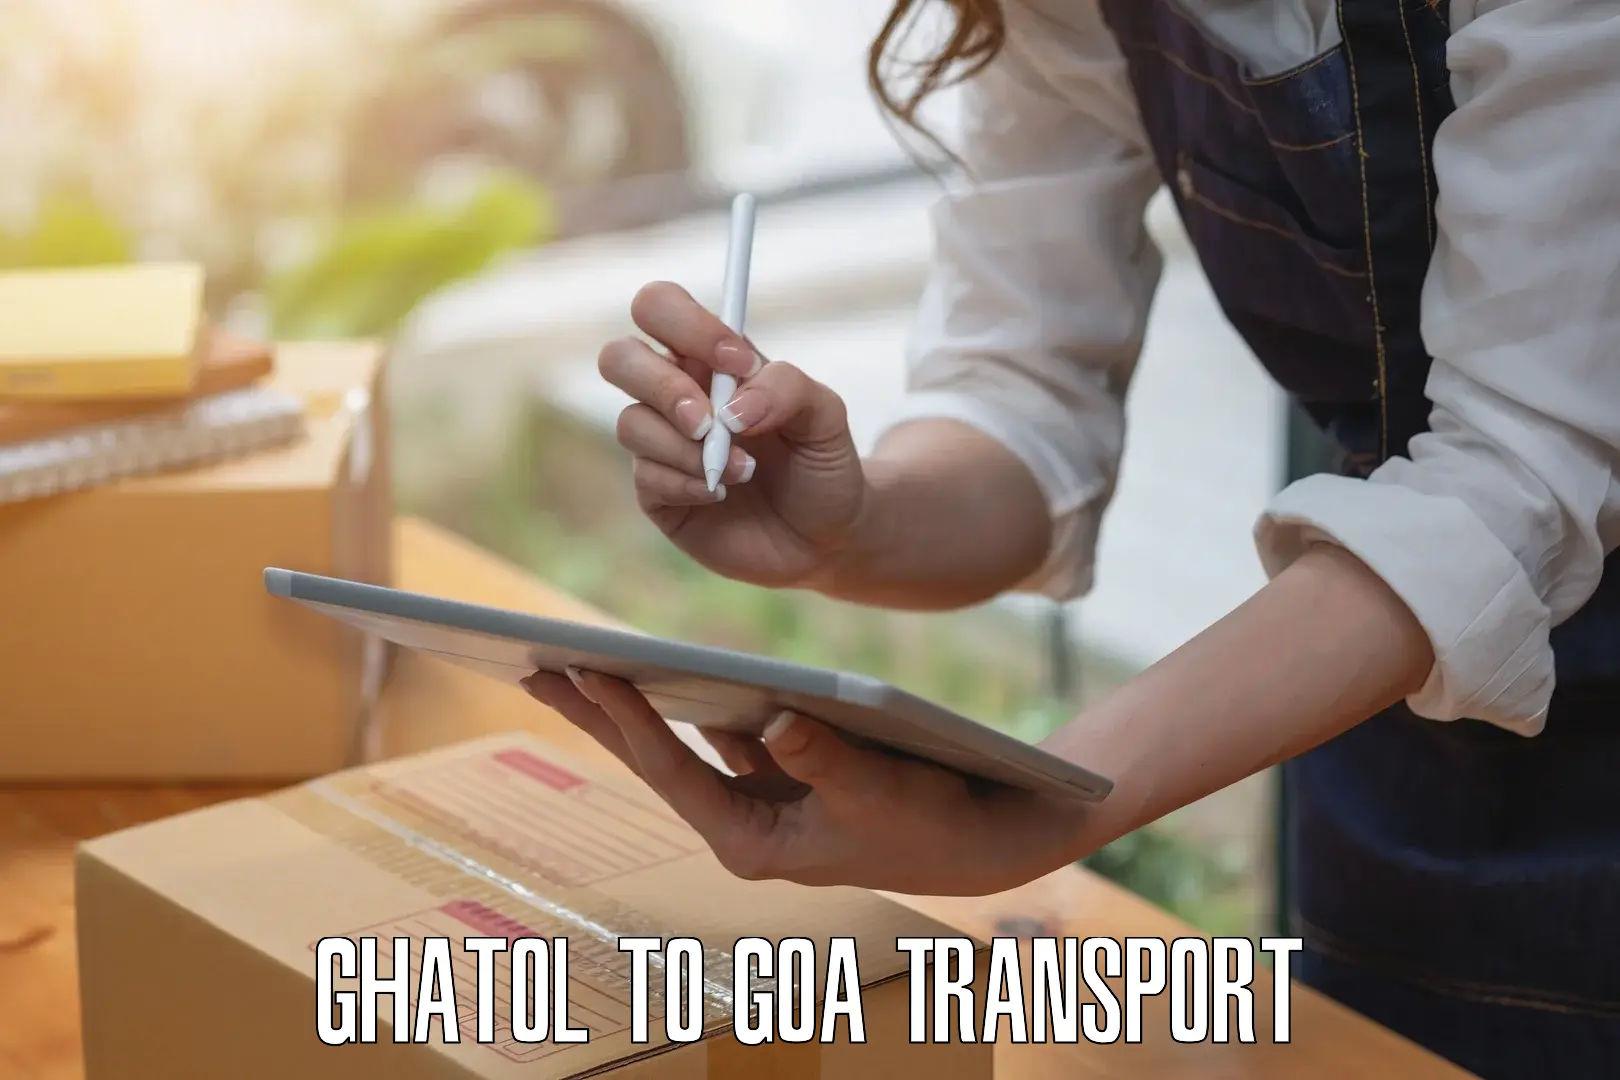 Domestic transport services Ghatol to Bardez